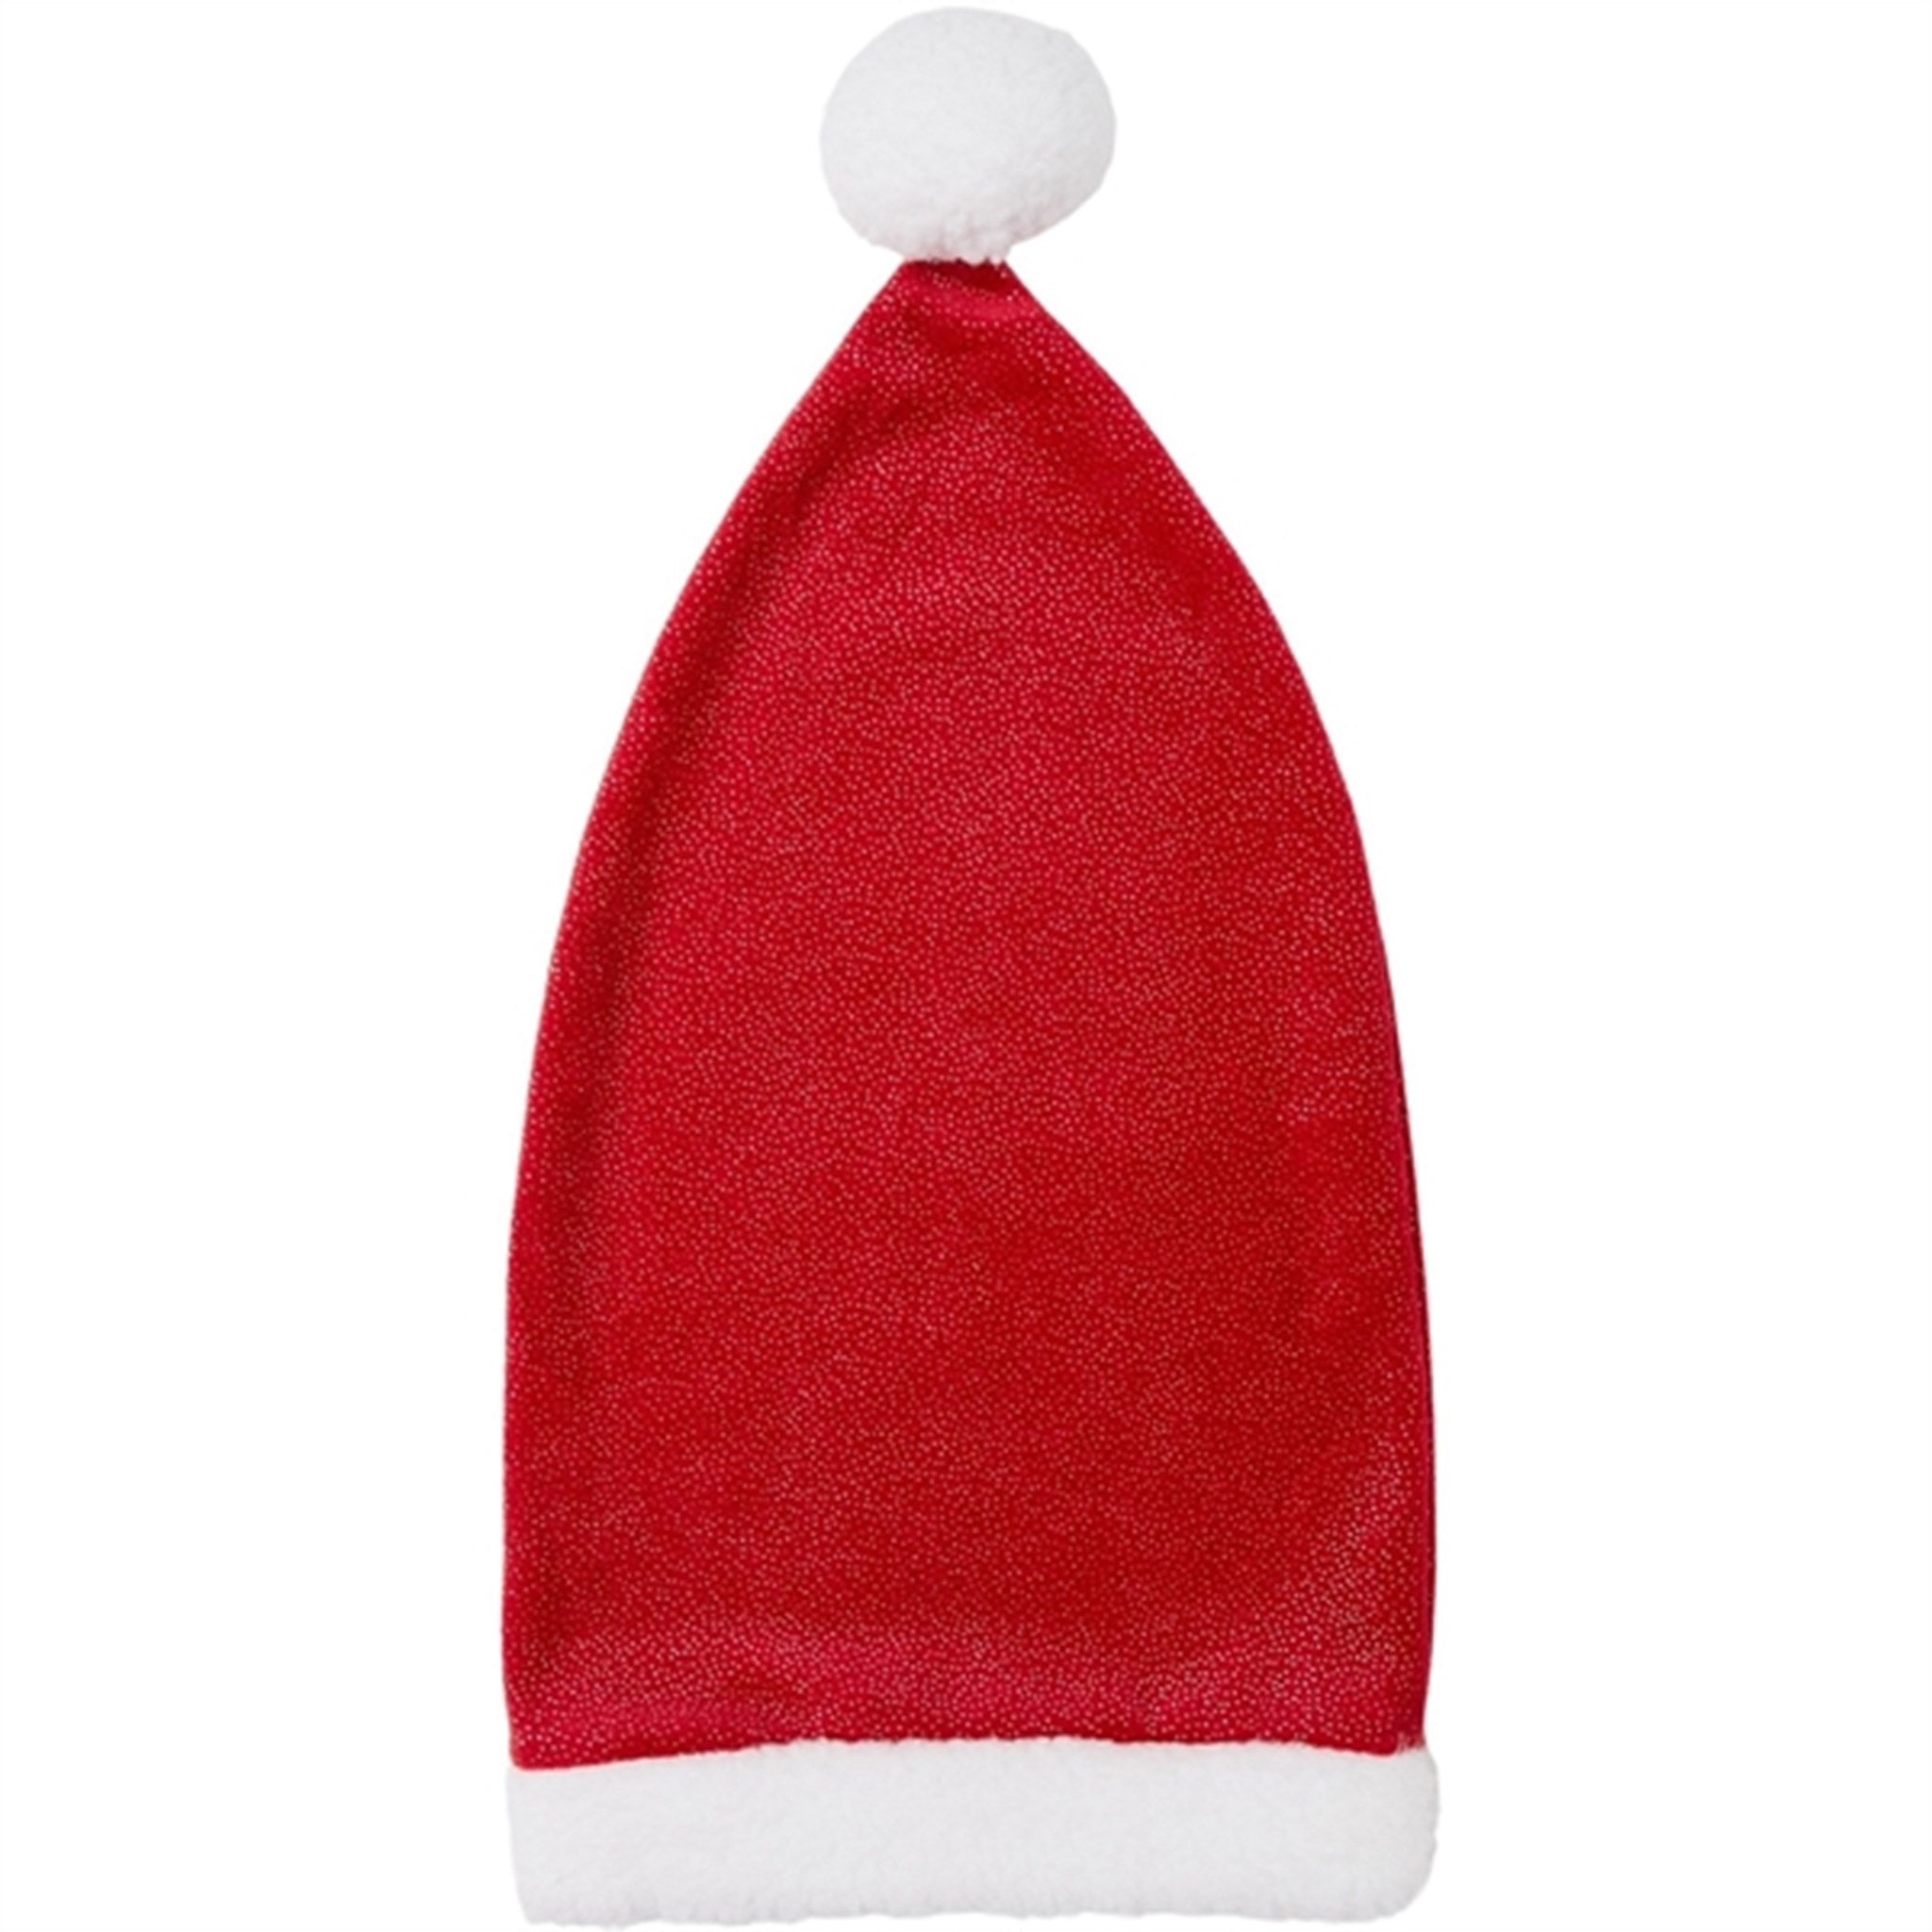 Name it Jester Red Ristmas Santa Hat Glitter